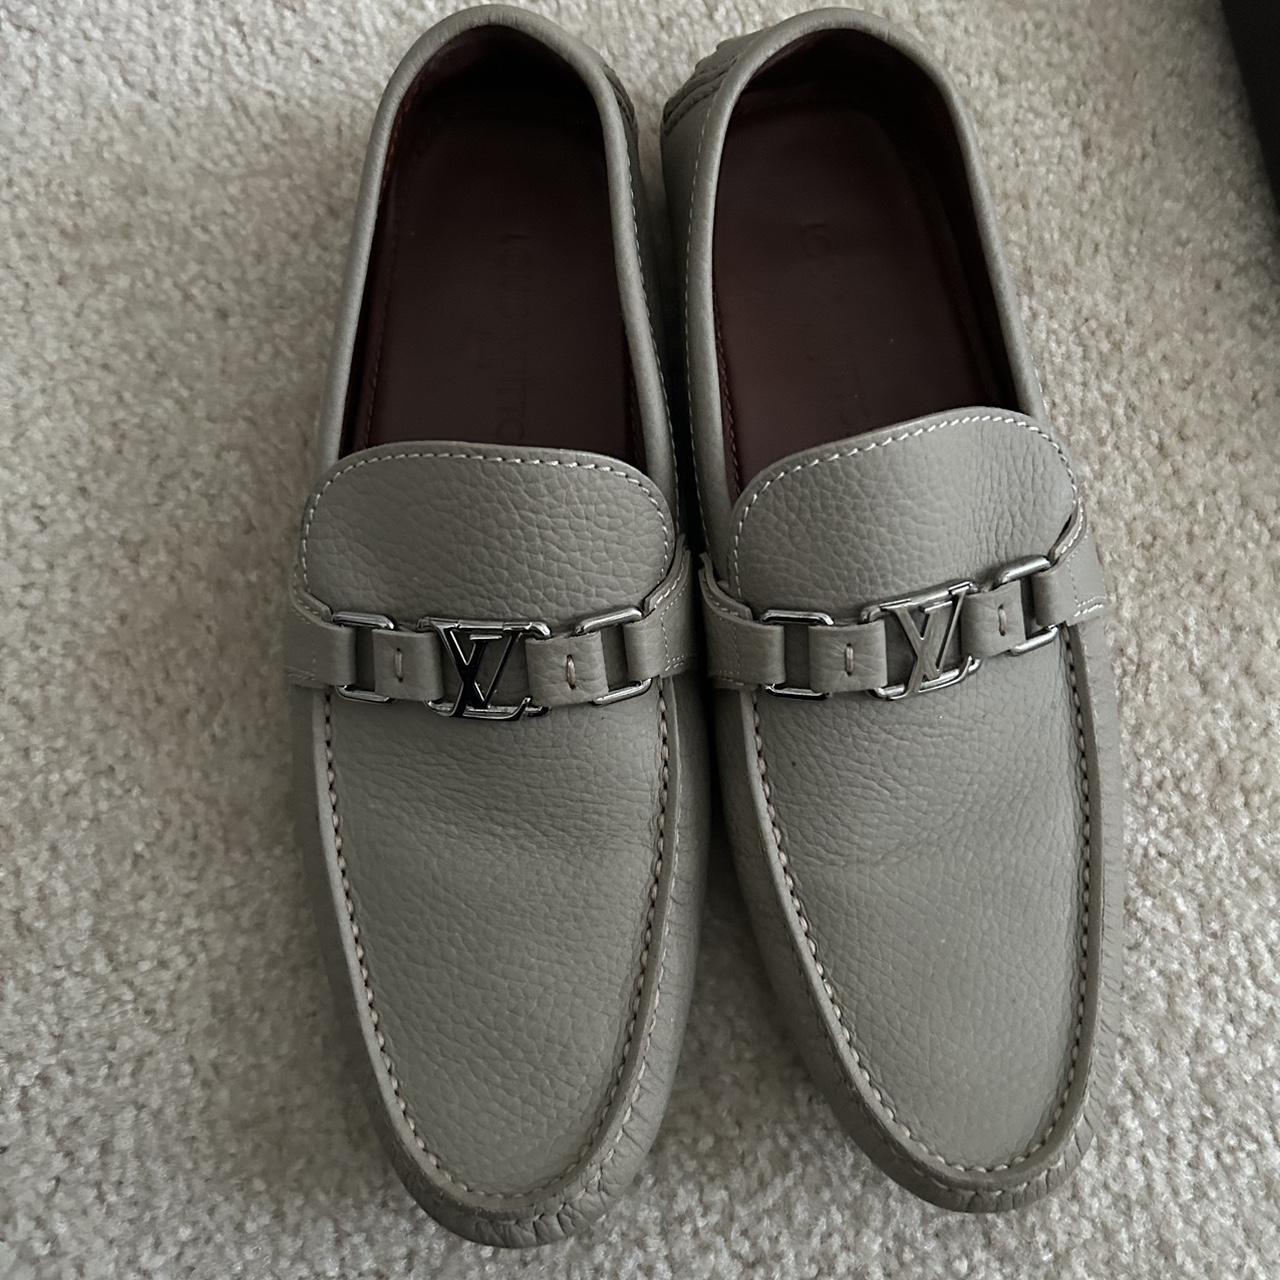 New Louis Vuitton men's loafers size 9 1/2 basically - Depop